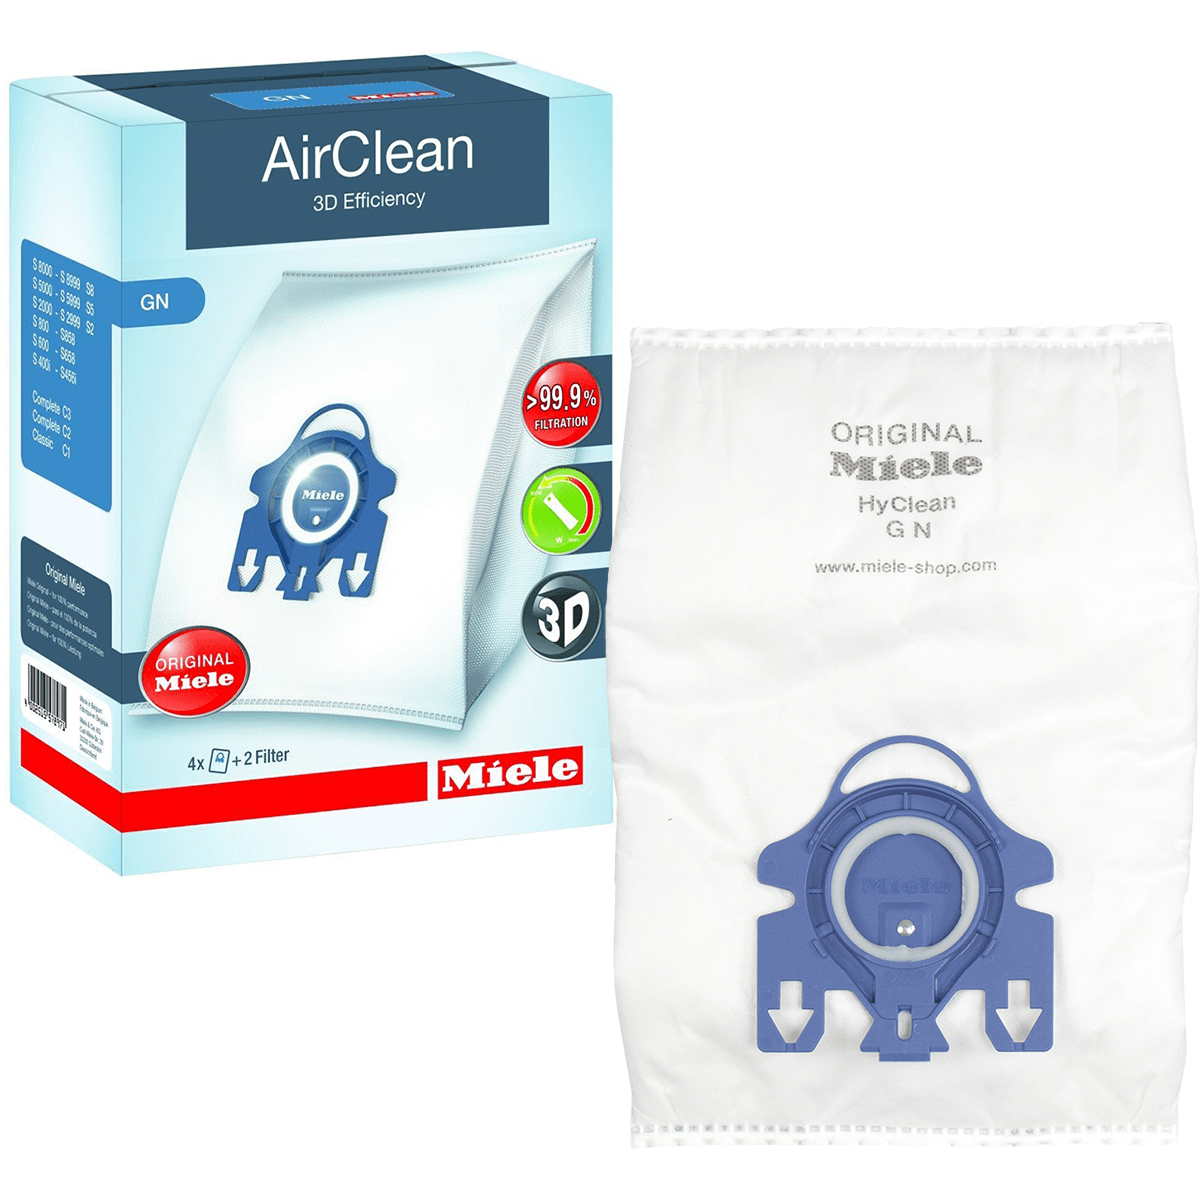 Genuine 3D Efficiency HyClean Dust Bags For Miele GN Vacuum Cleaners for sale online 